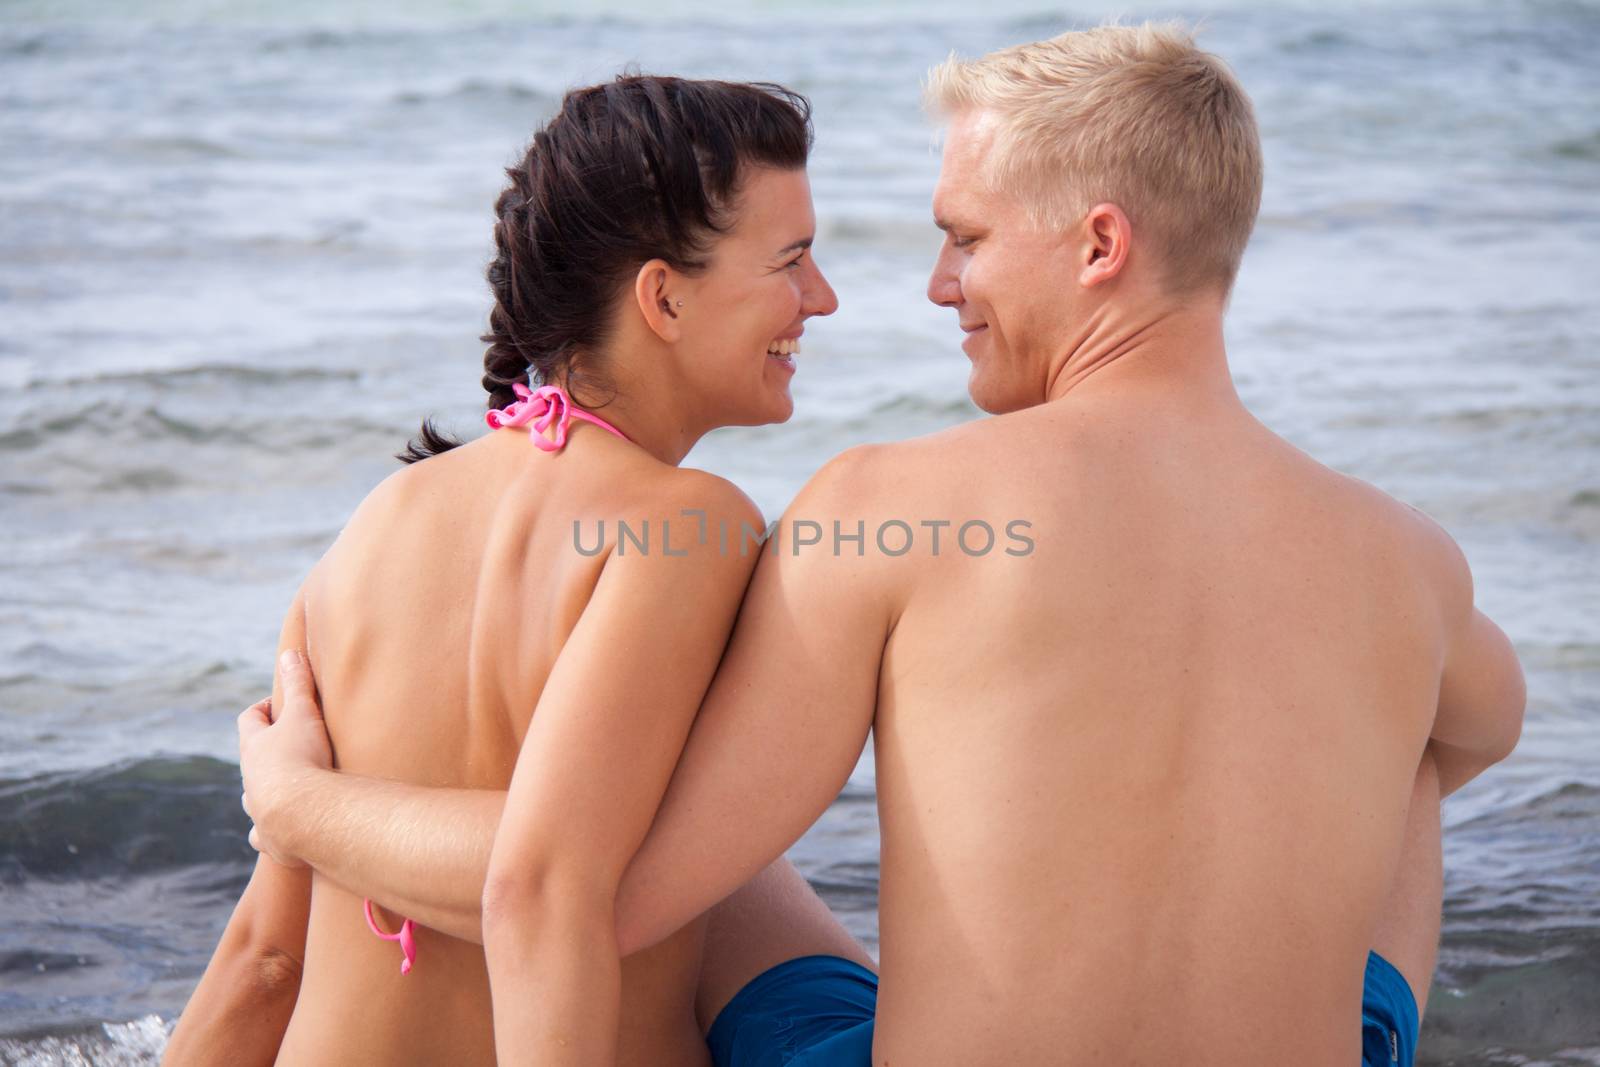 Happy romantic young couple enjoying a date at the seaside sitting arm in arm overlooking the ocean and looking back at the camera with charming happy smiles